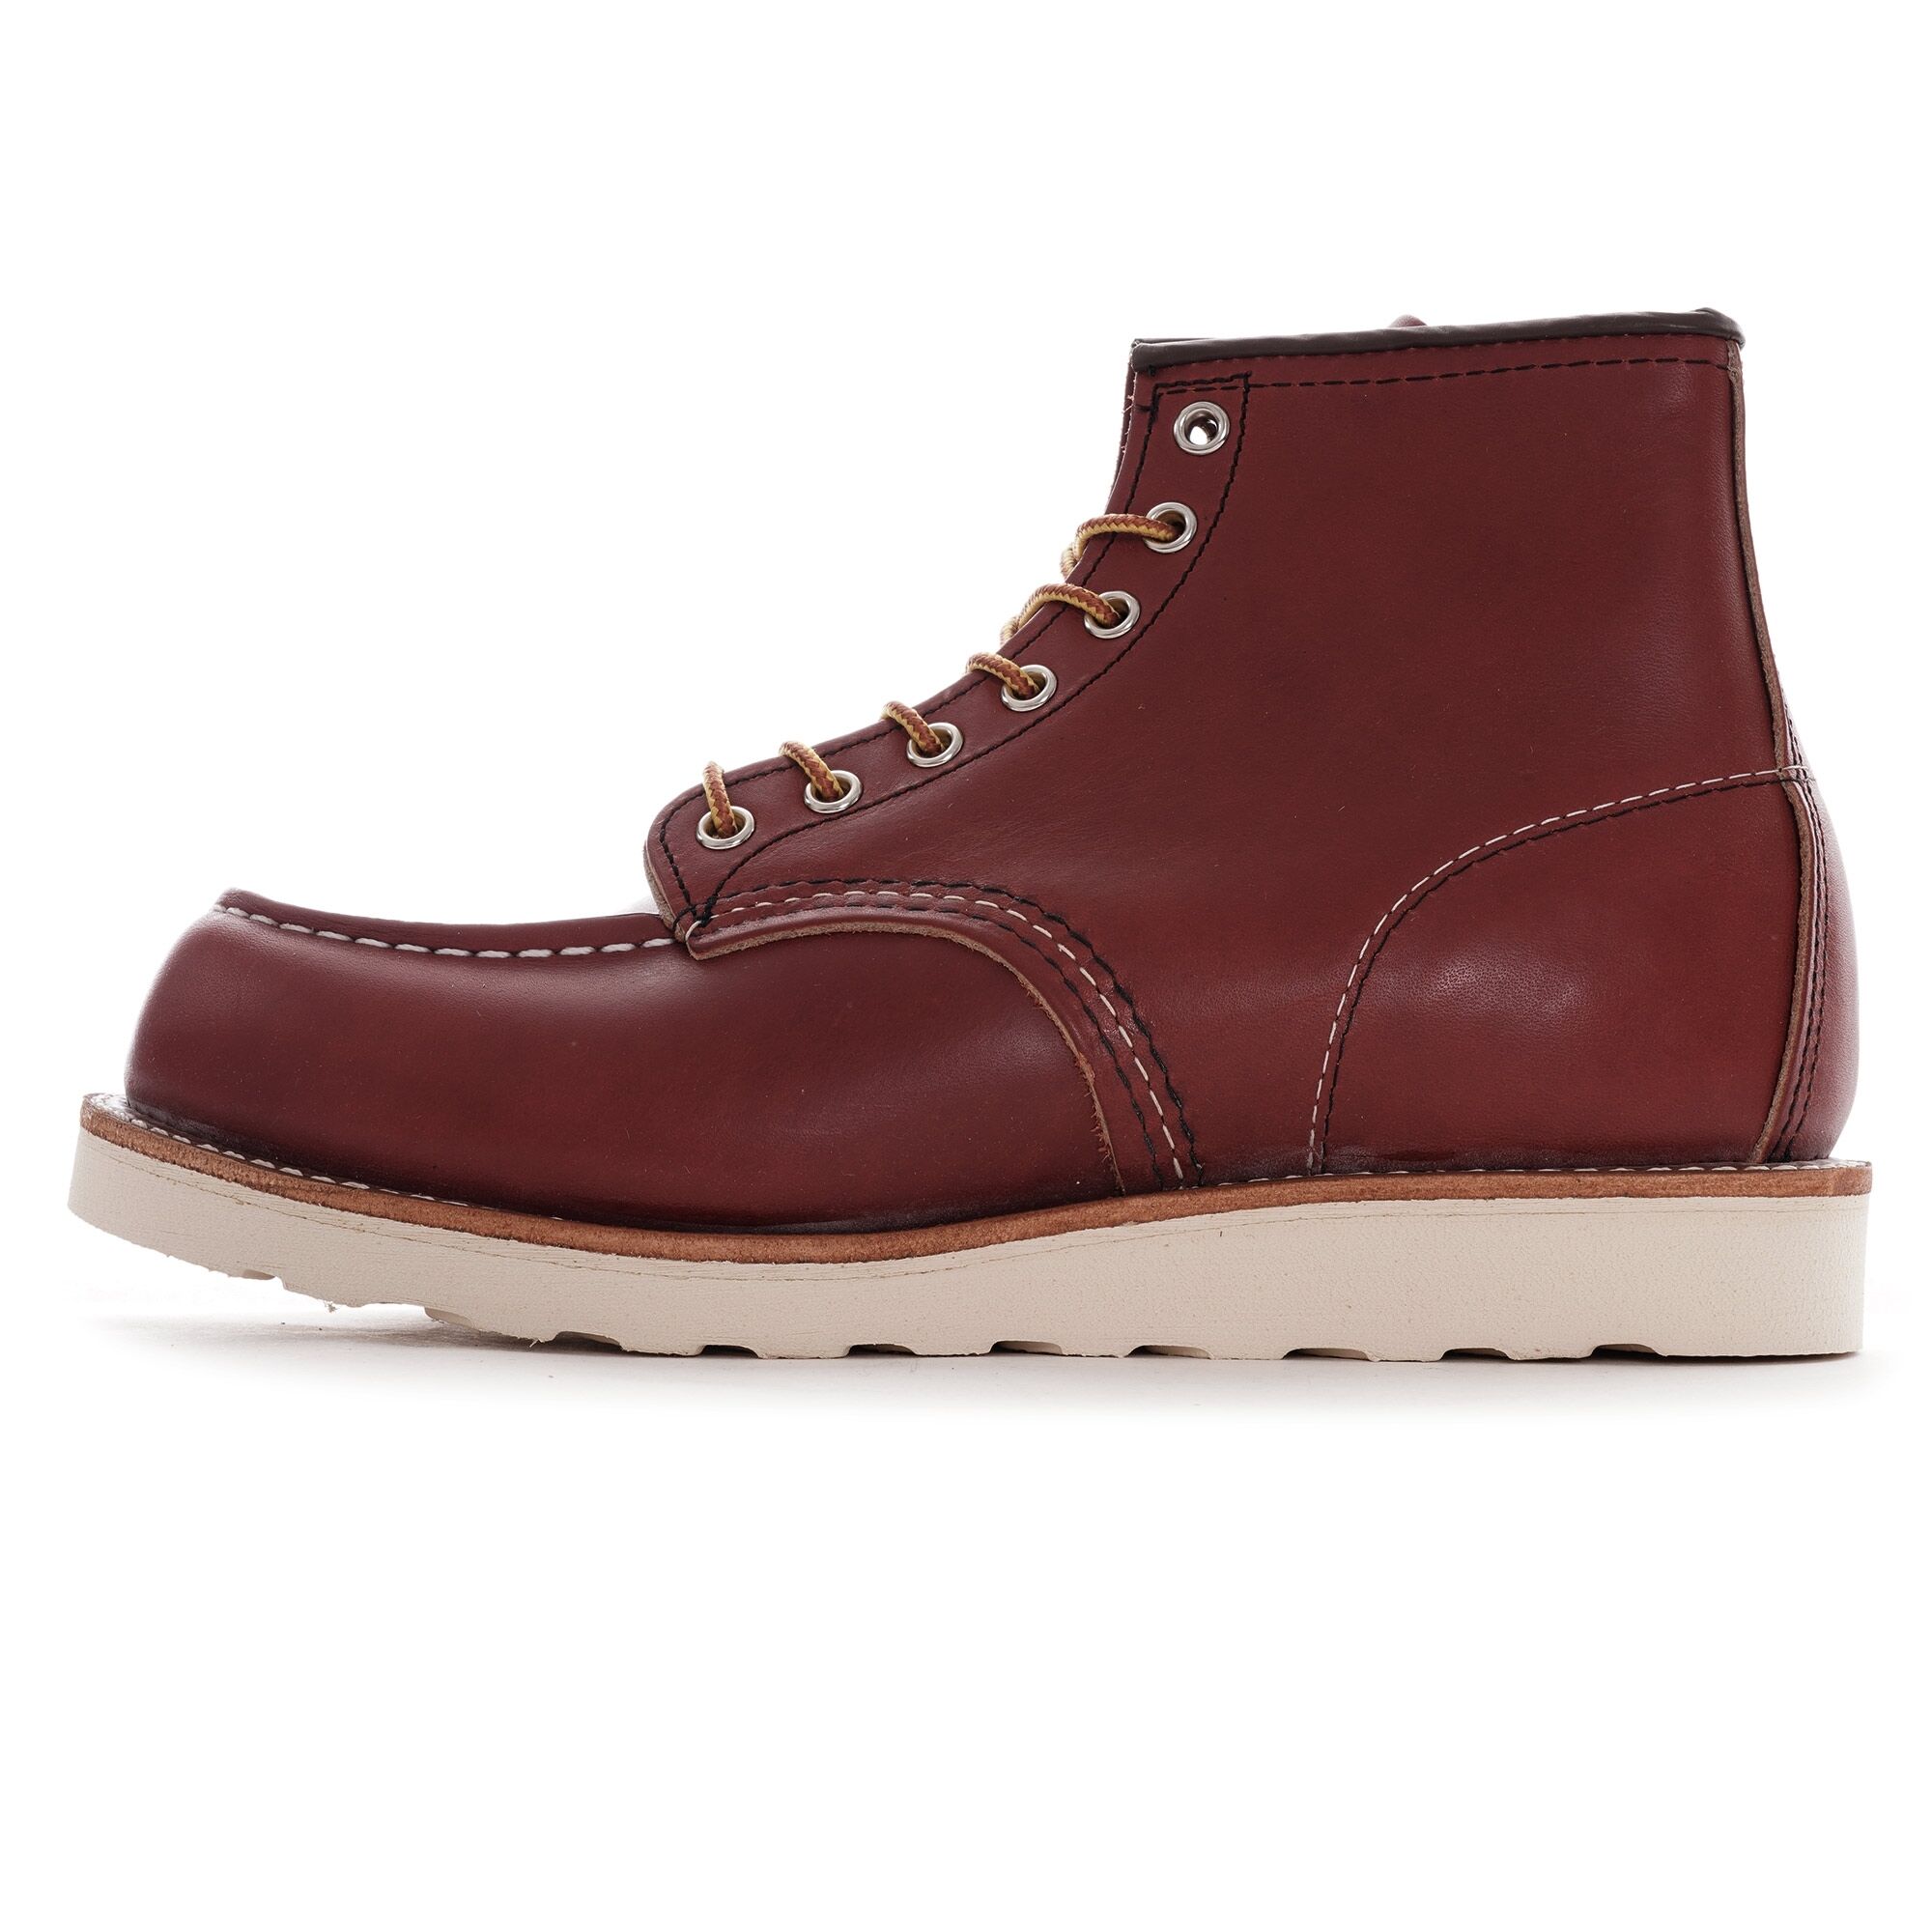 Red Wing Classic Moc Toe Boot - Briar - 8875D-BRN 6 BOOT Colour: Brown - Brown - male - Size: UK 9.5